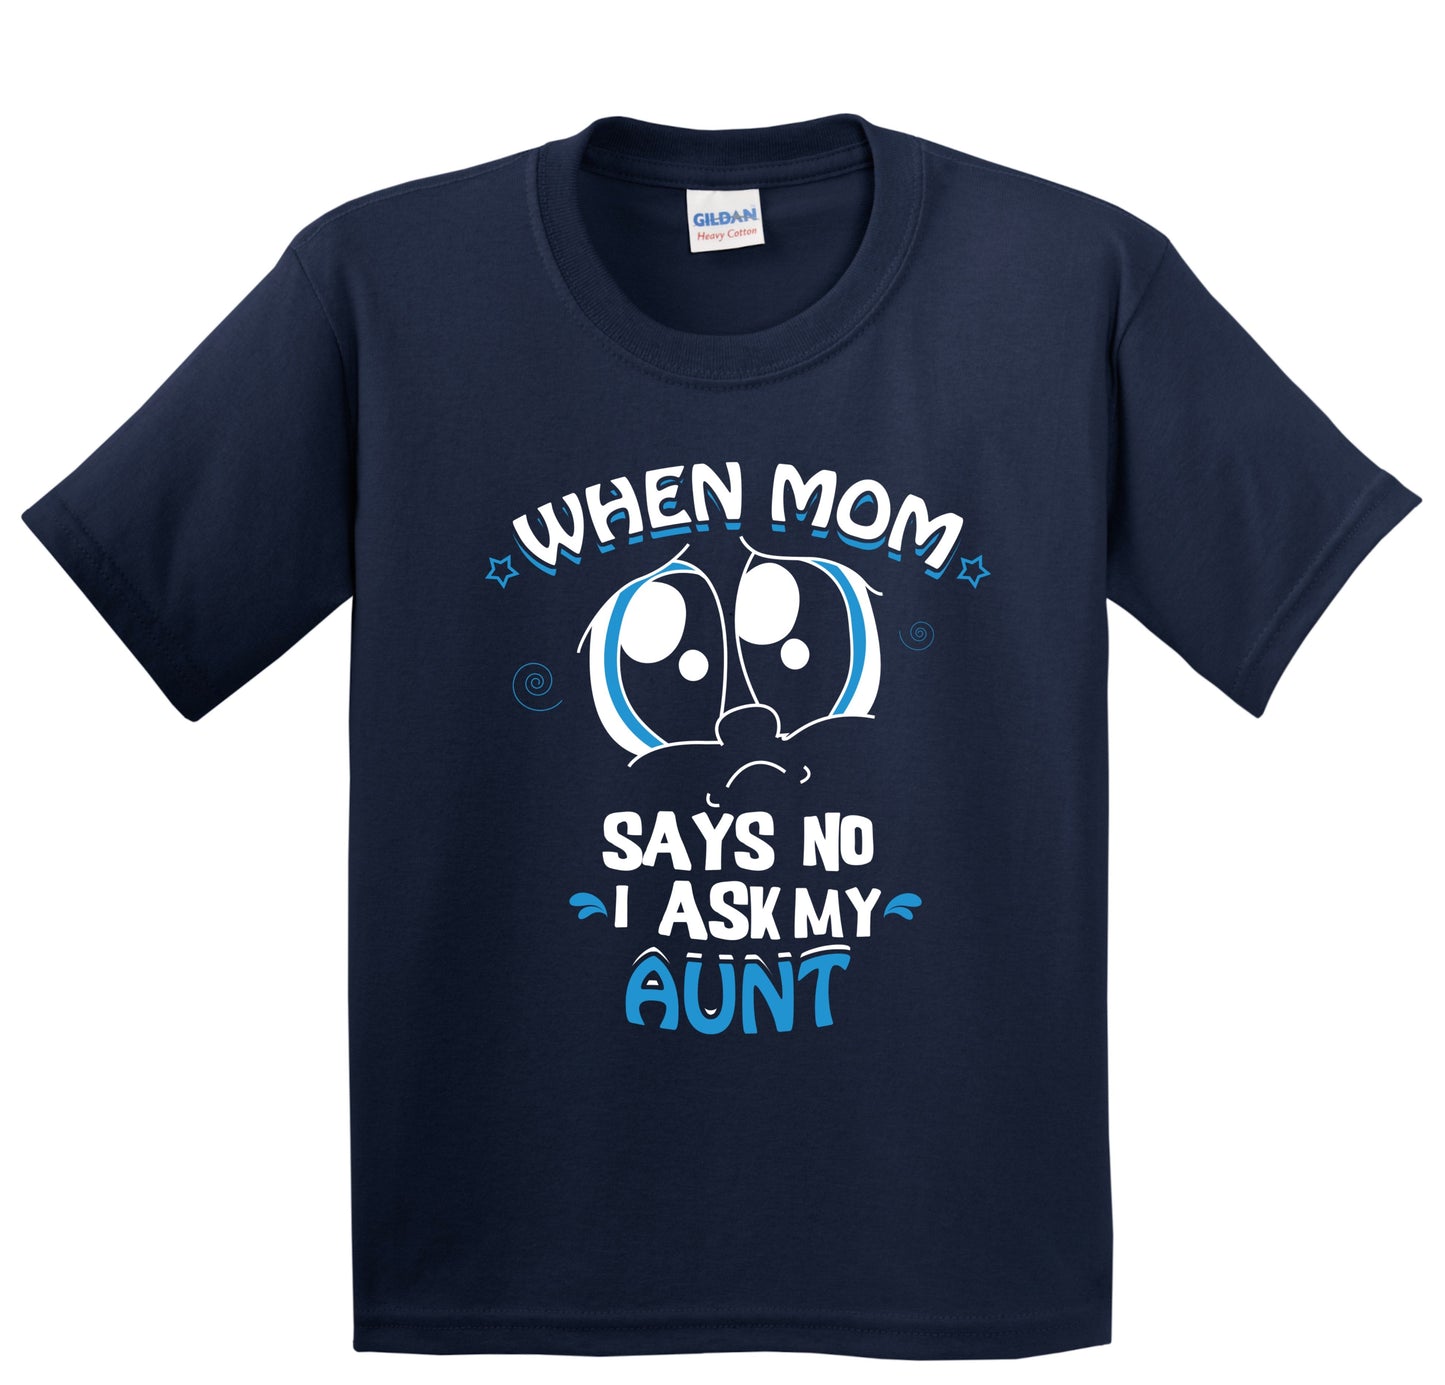 When Mom Says No I Ask My Aunt Funny Kids T-Shirt